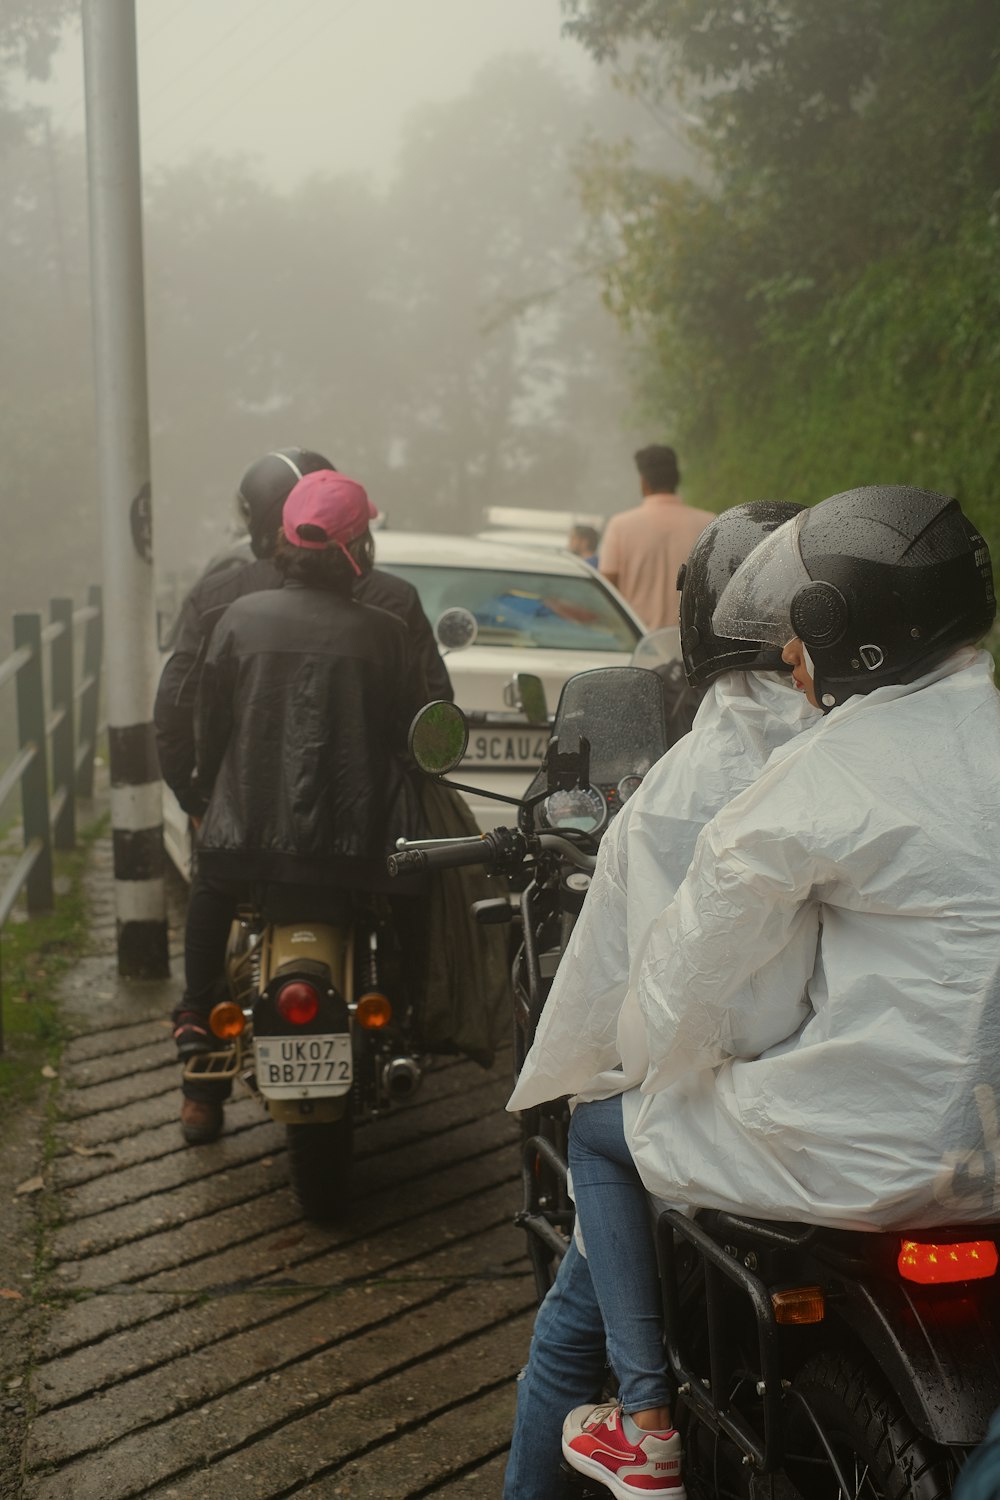 a group of people on motorcycles